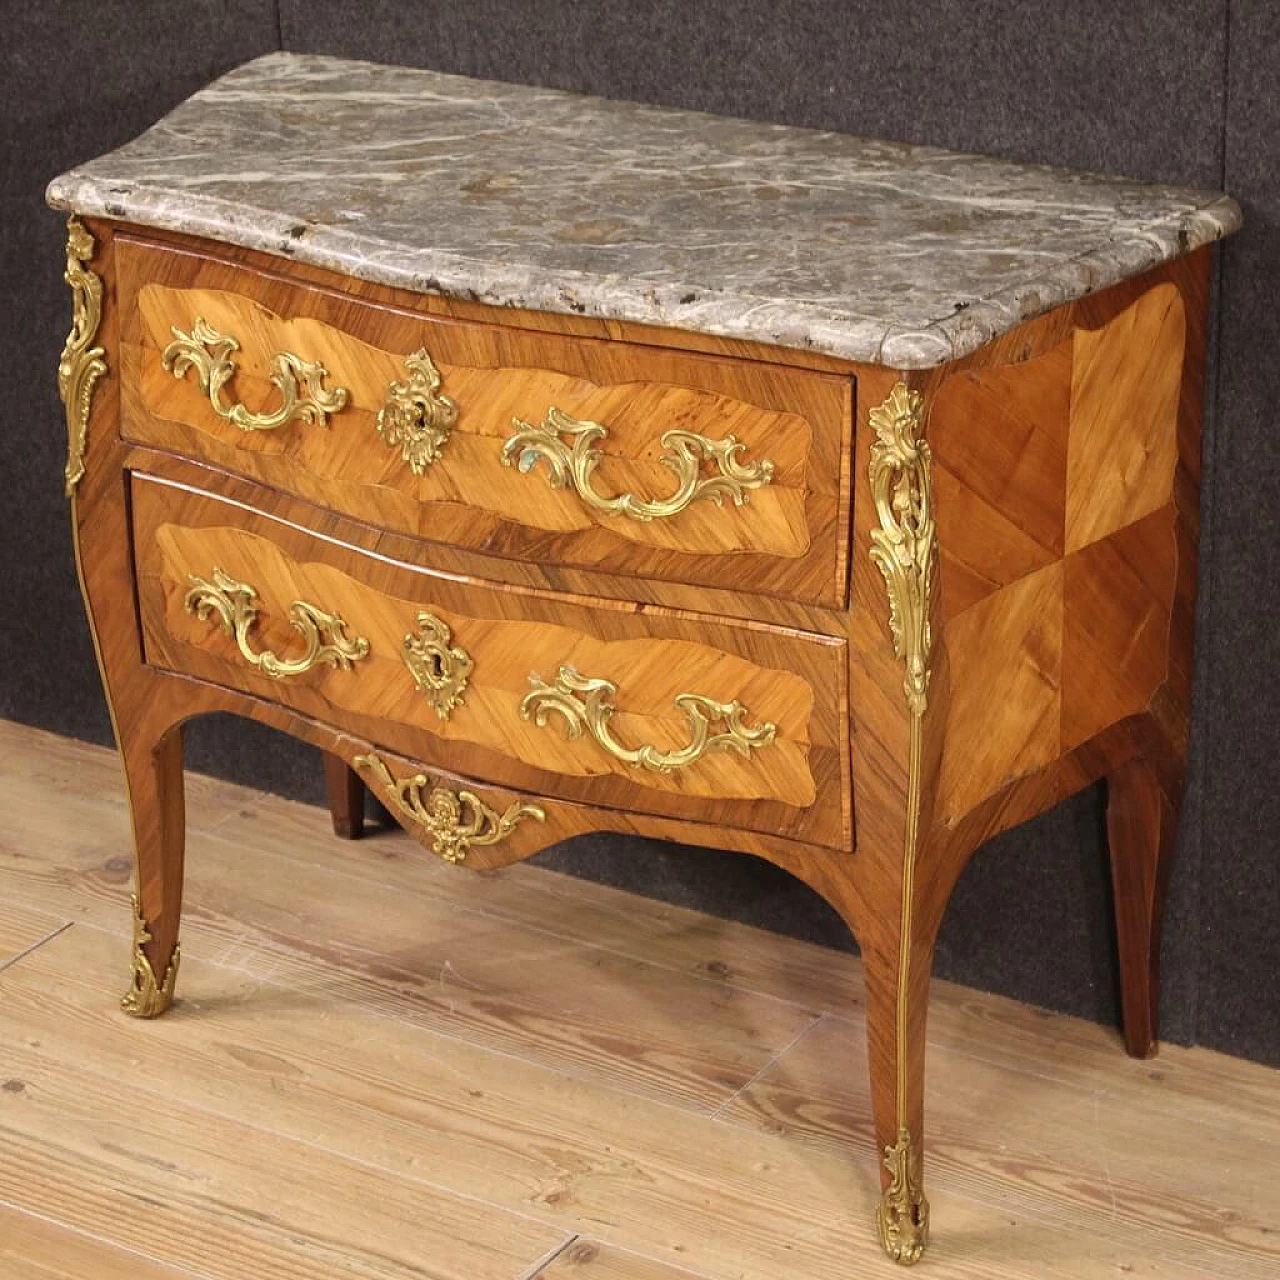 Two-drawer dresser in wood with marble top, mid-18th century 12